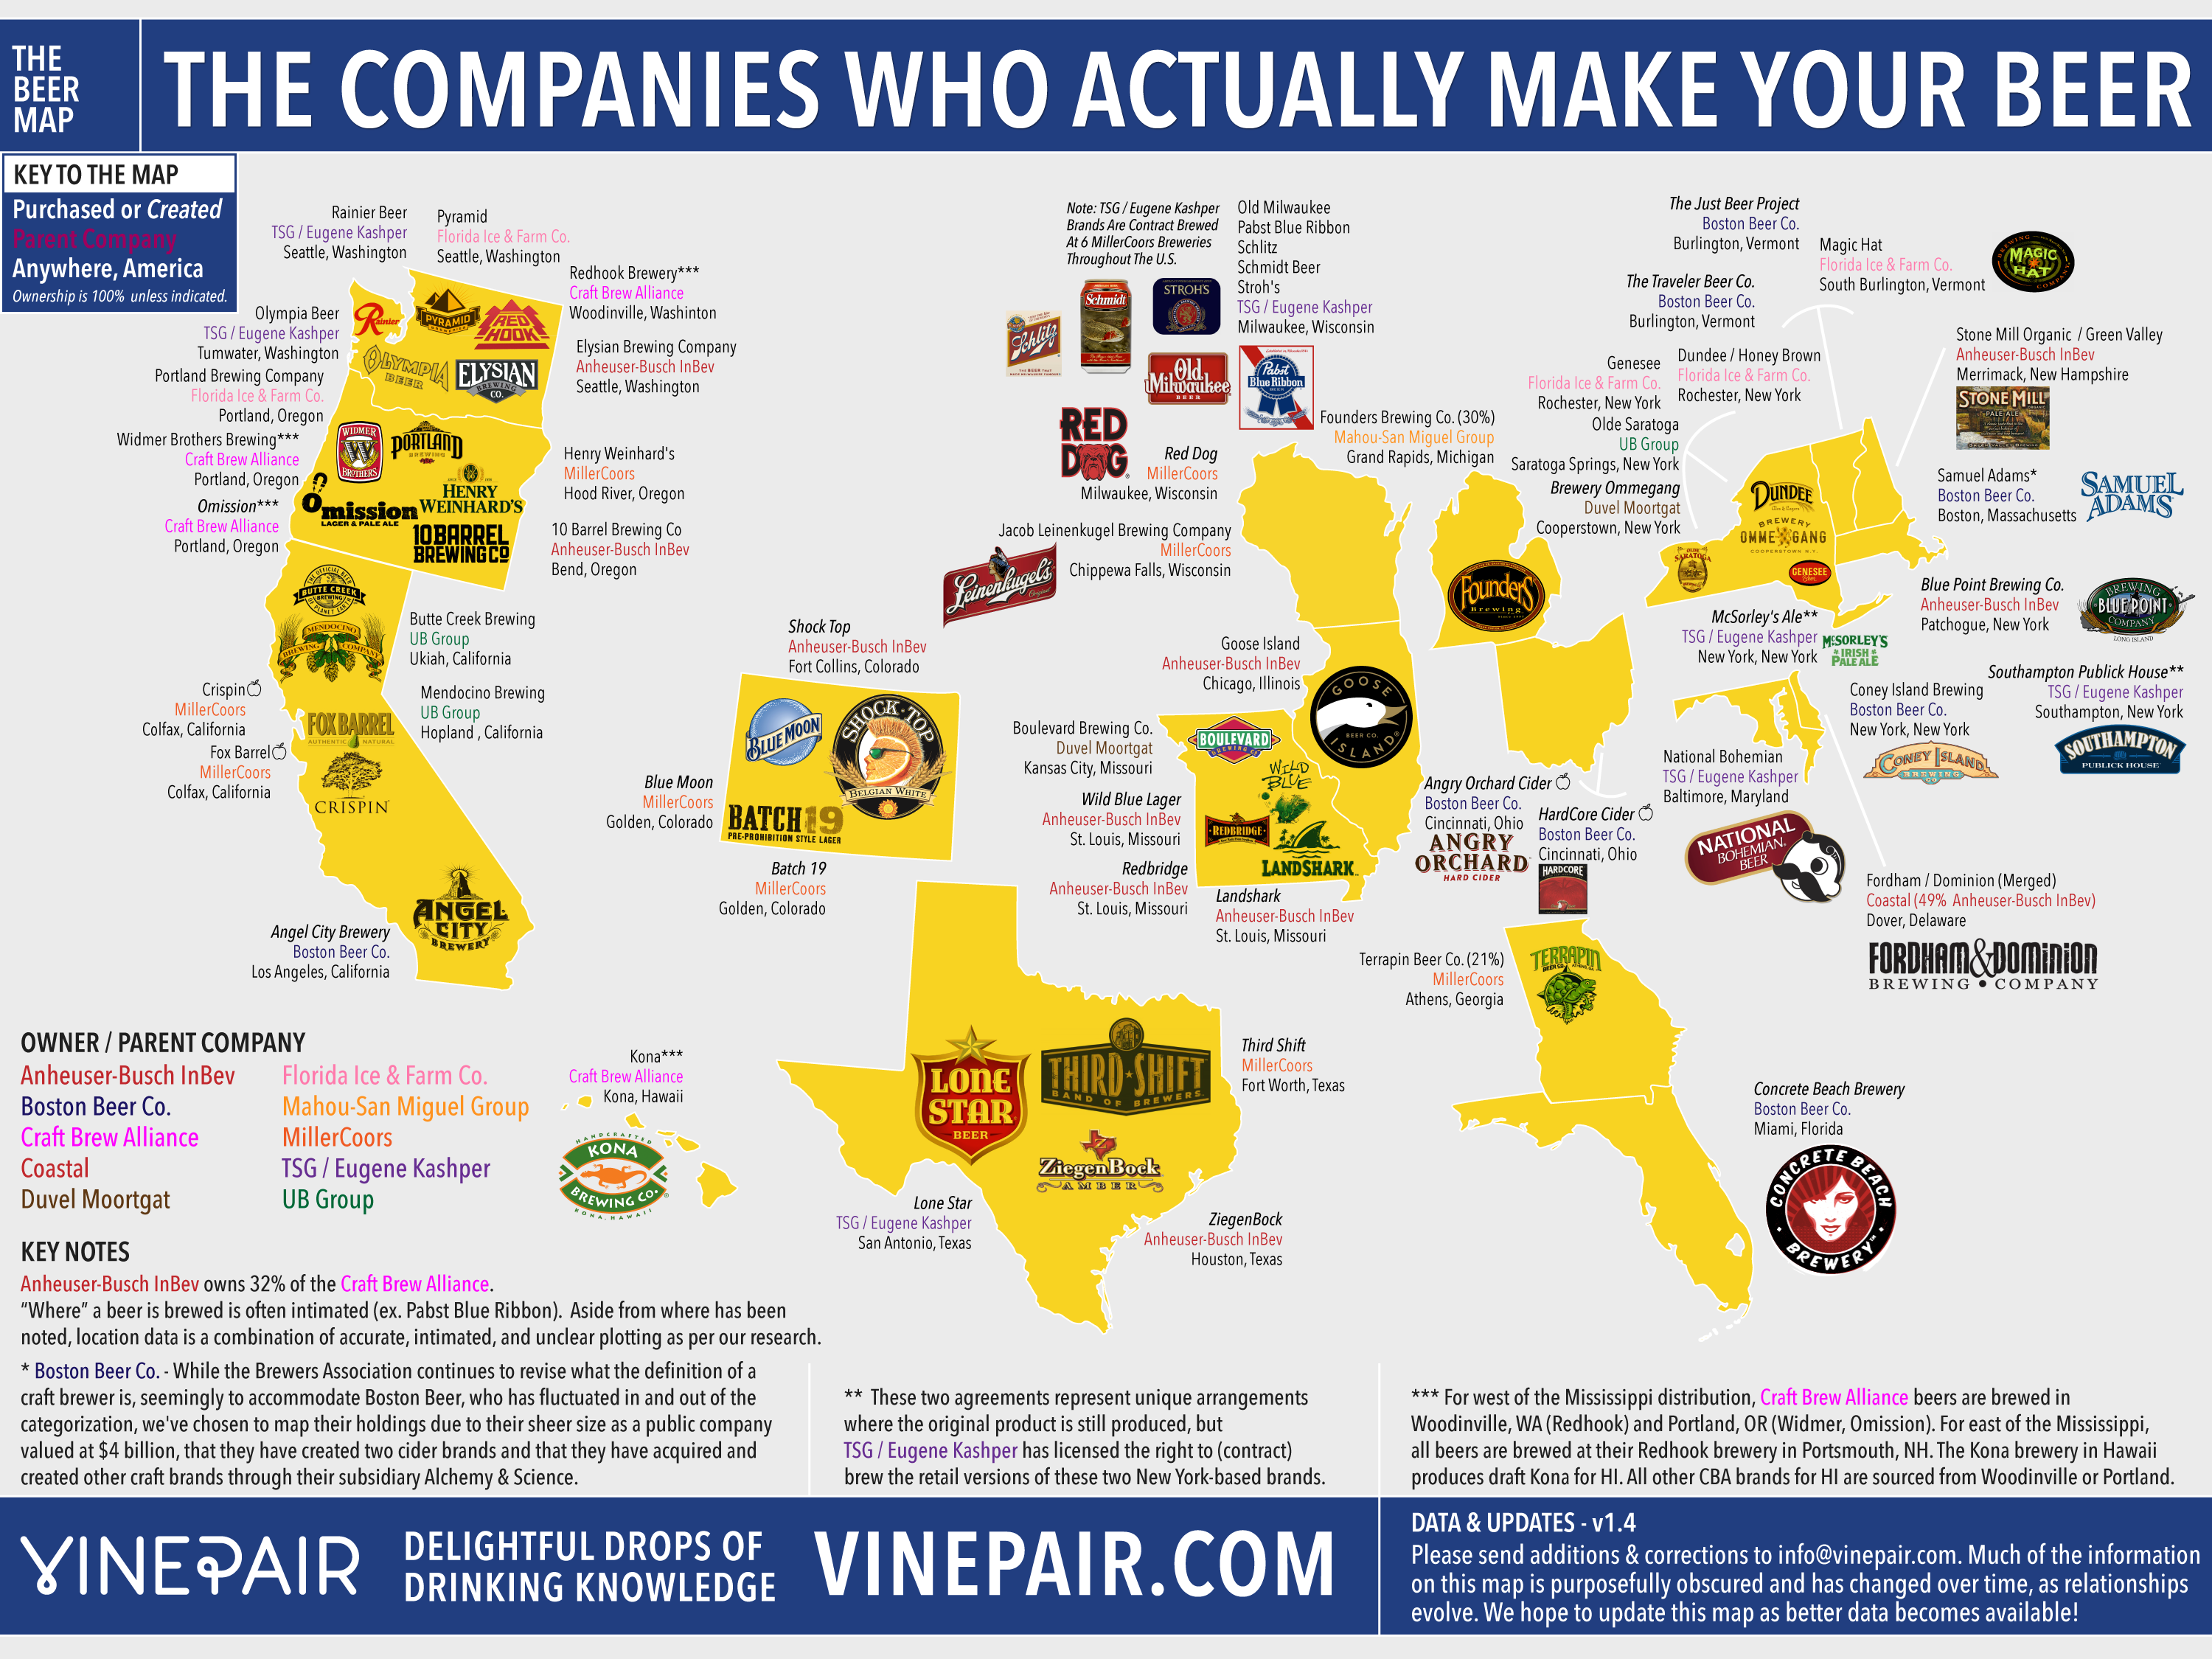 brandflakesforbreakfast who owns your beer? (infographic)